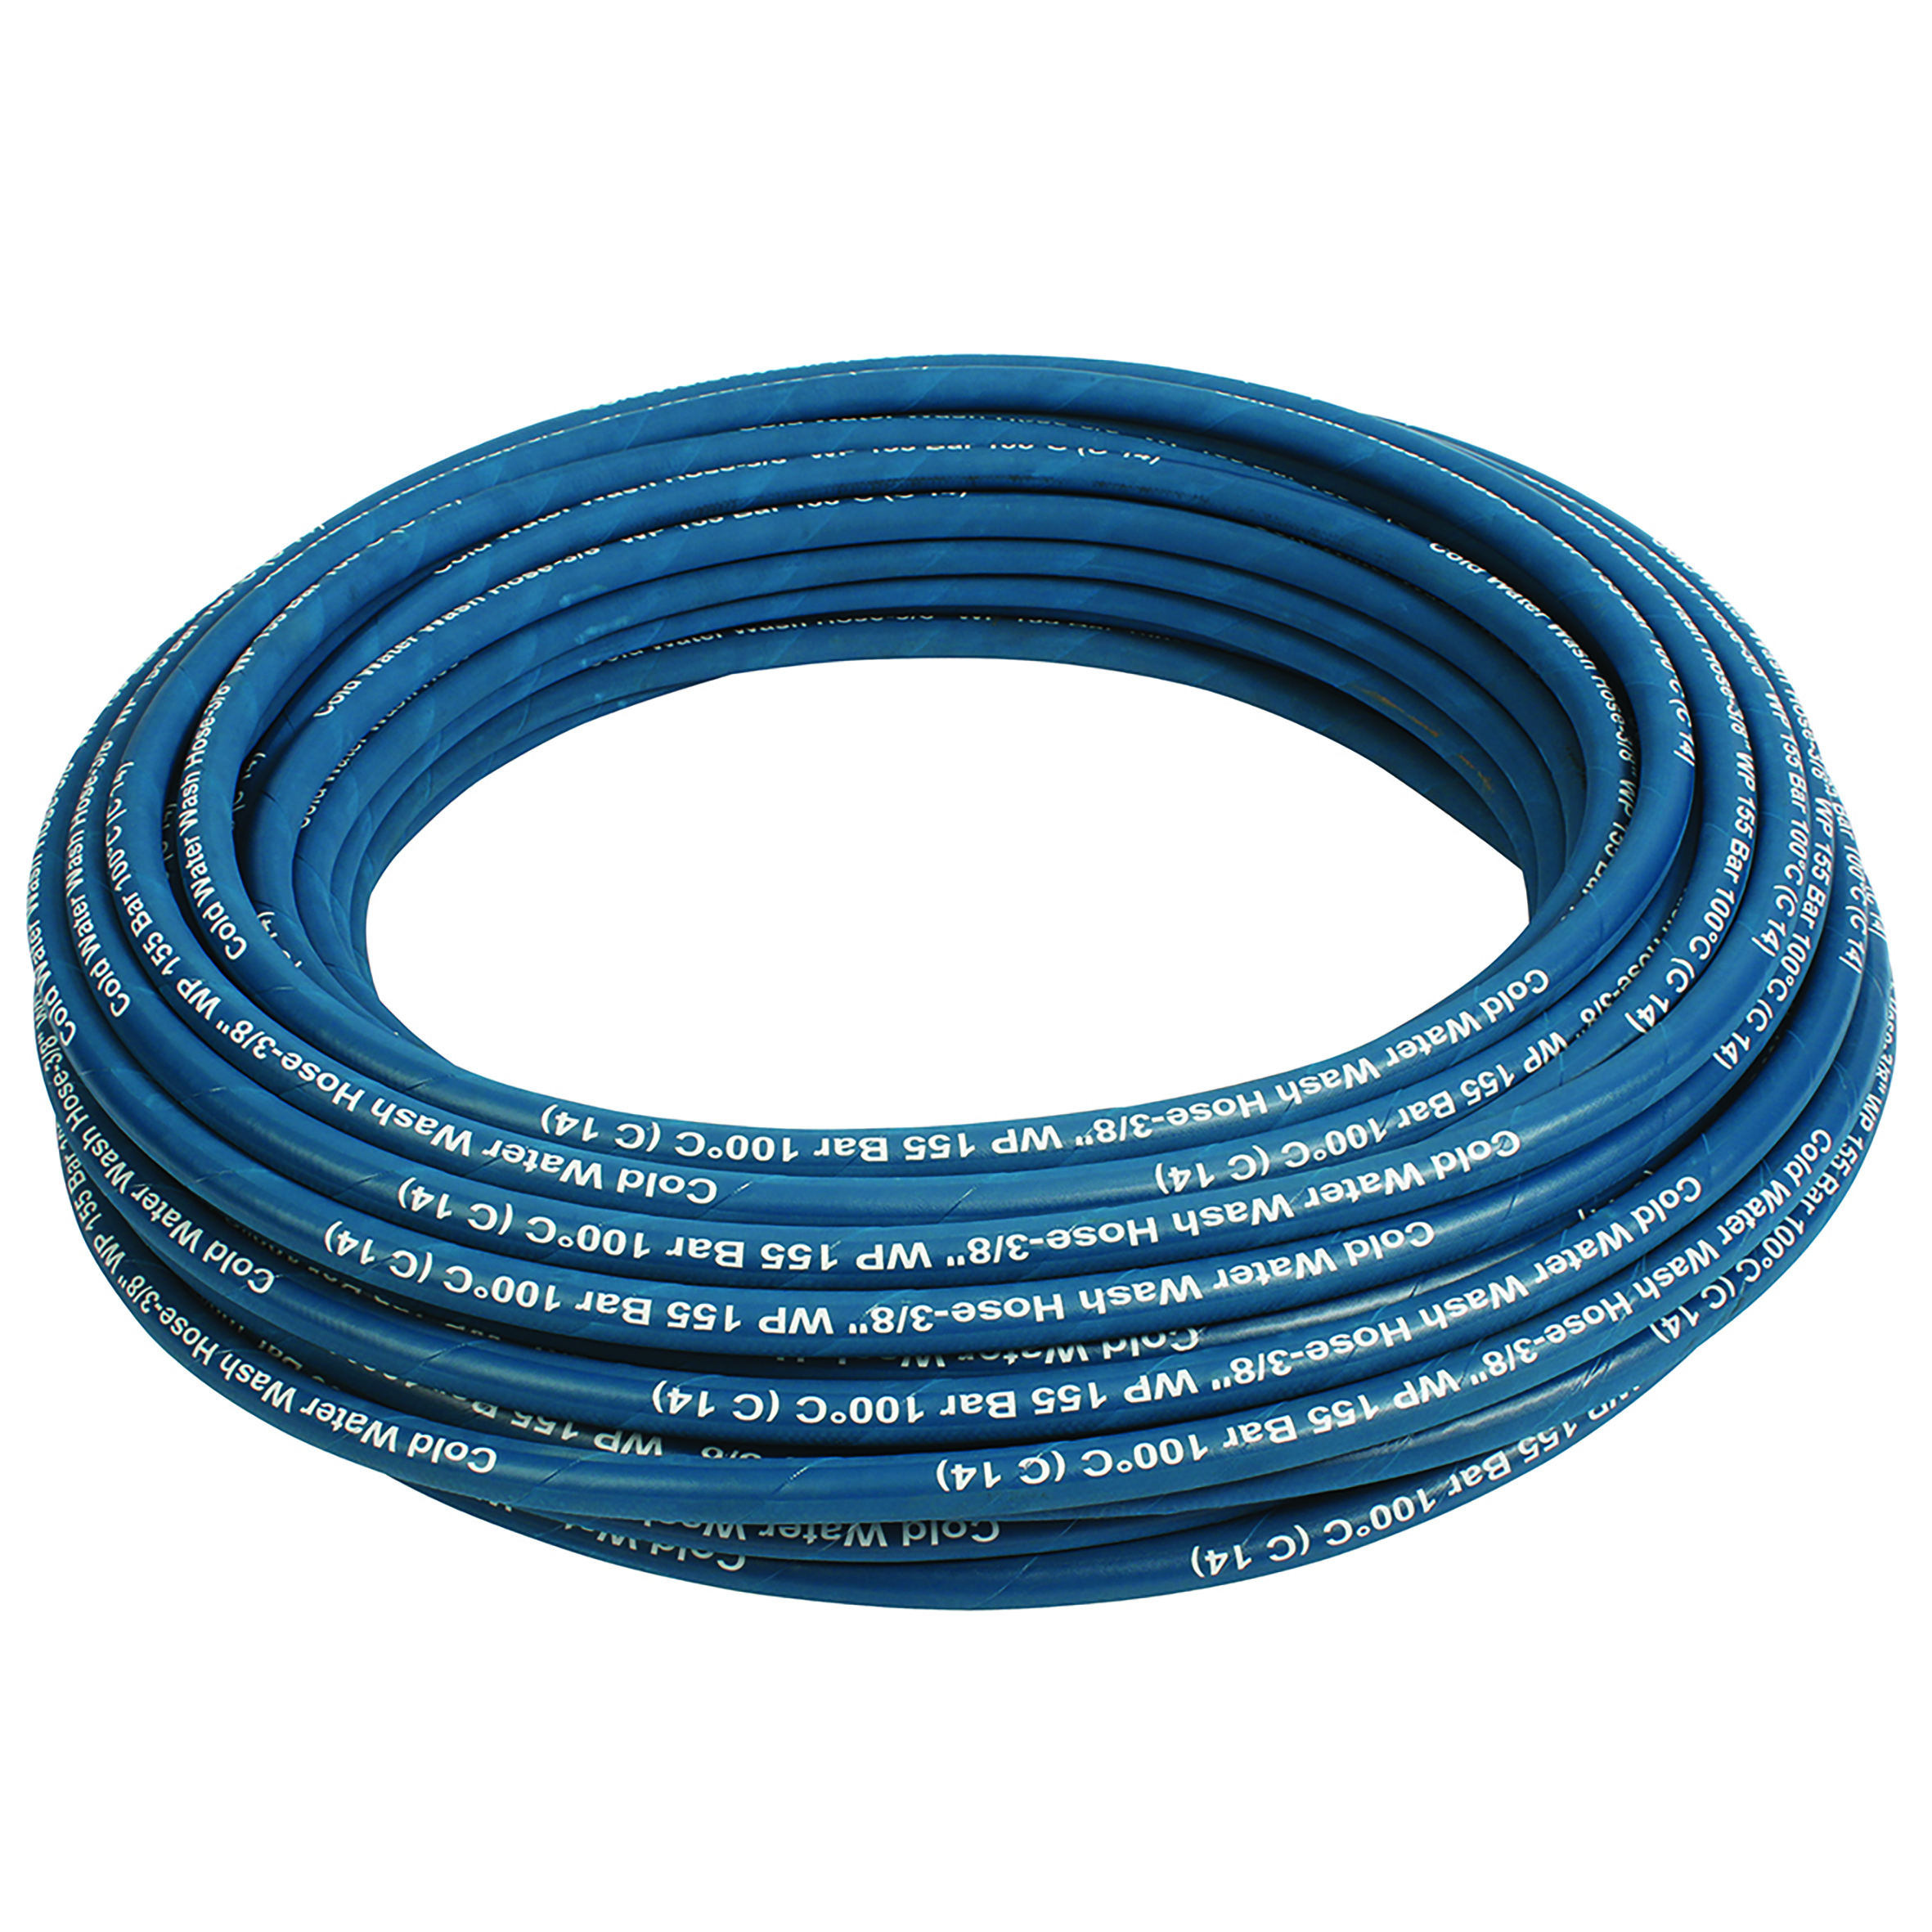 COLD WATER 1/4" R1 BLUE 25M